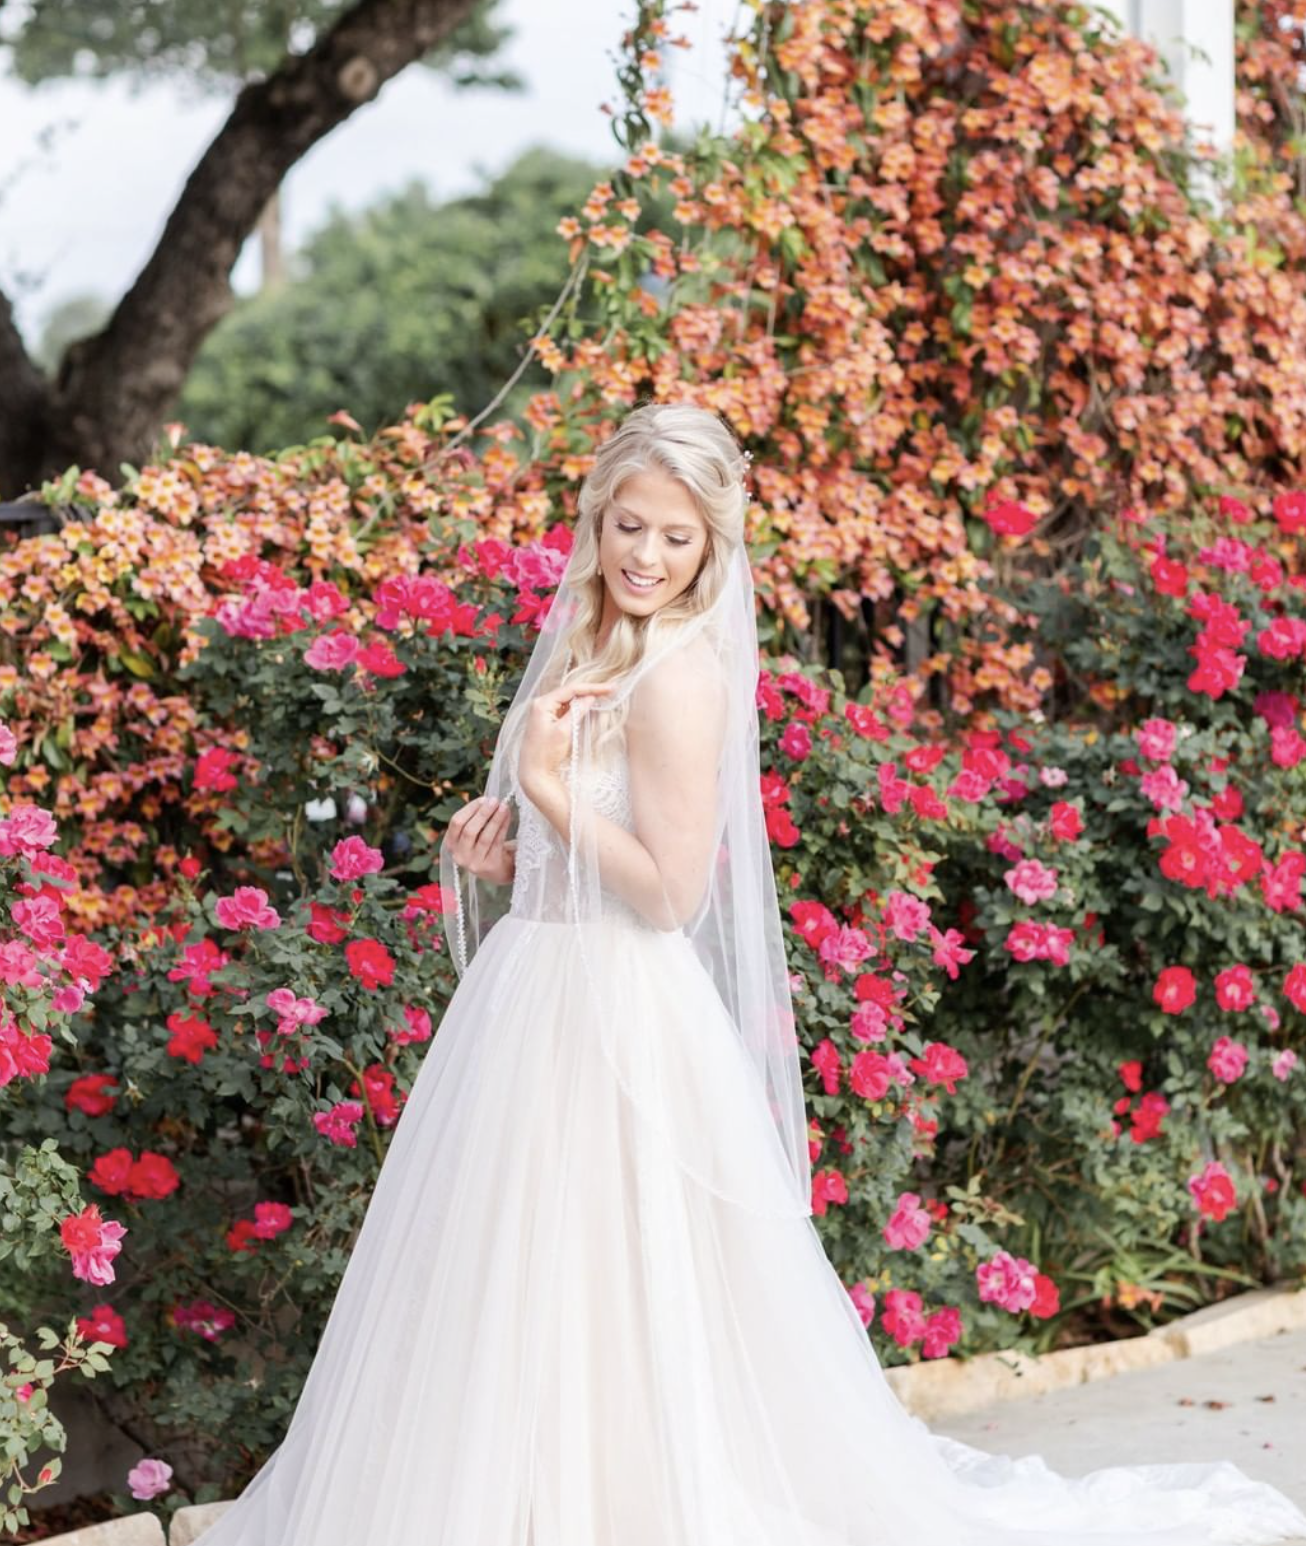 A bride stands in front of a wall of red, orange, and pink flowers with lush green bushes in the background.